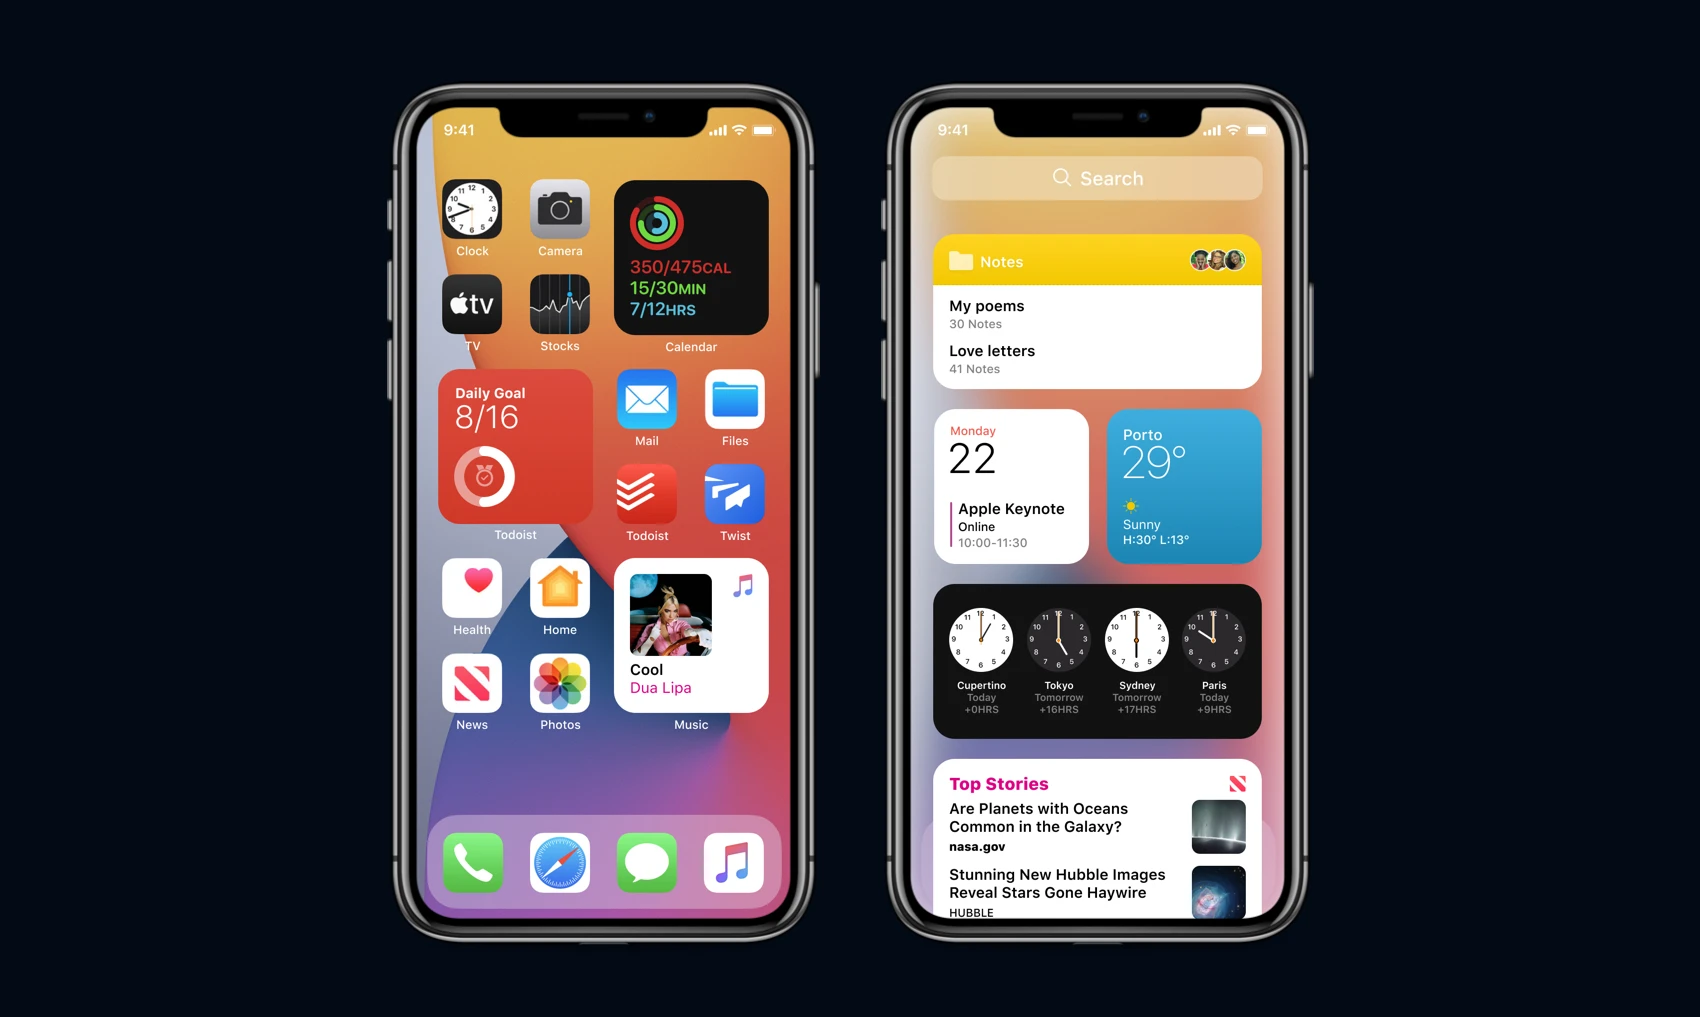 Apple Widgets UI Kit for Figma - Doist design team recreated the recently announced Apple Widgets from iOS 14 for you. The goal of this UI kit template file is to help you kick start your designs and prototypes. We hope it is helpful!